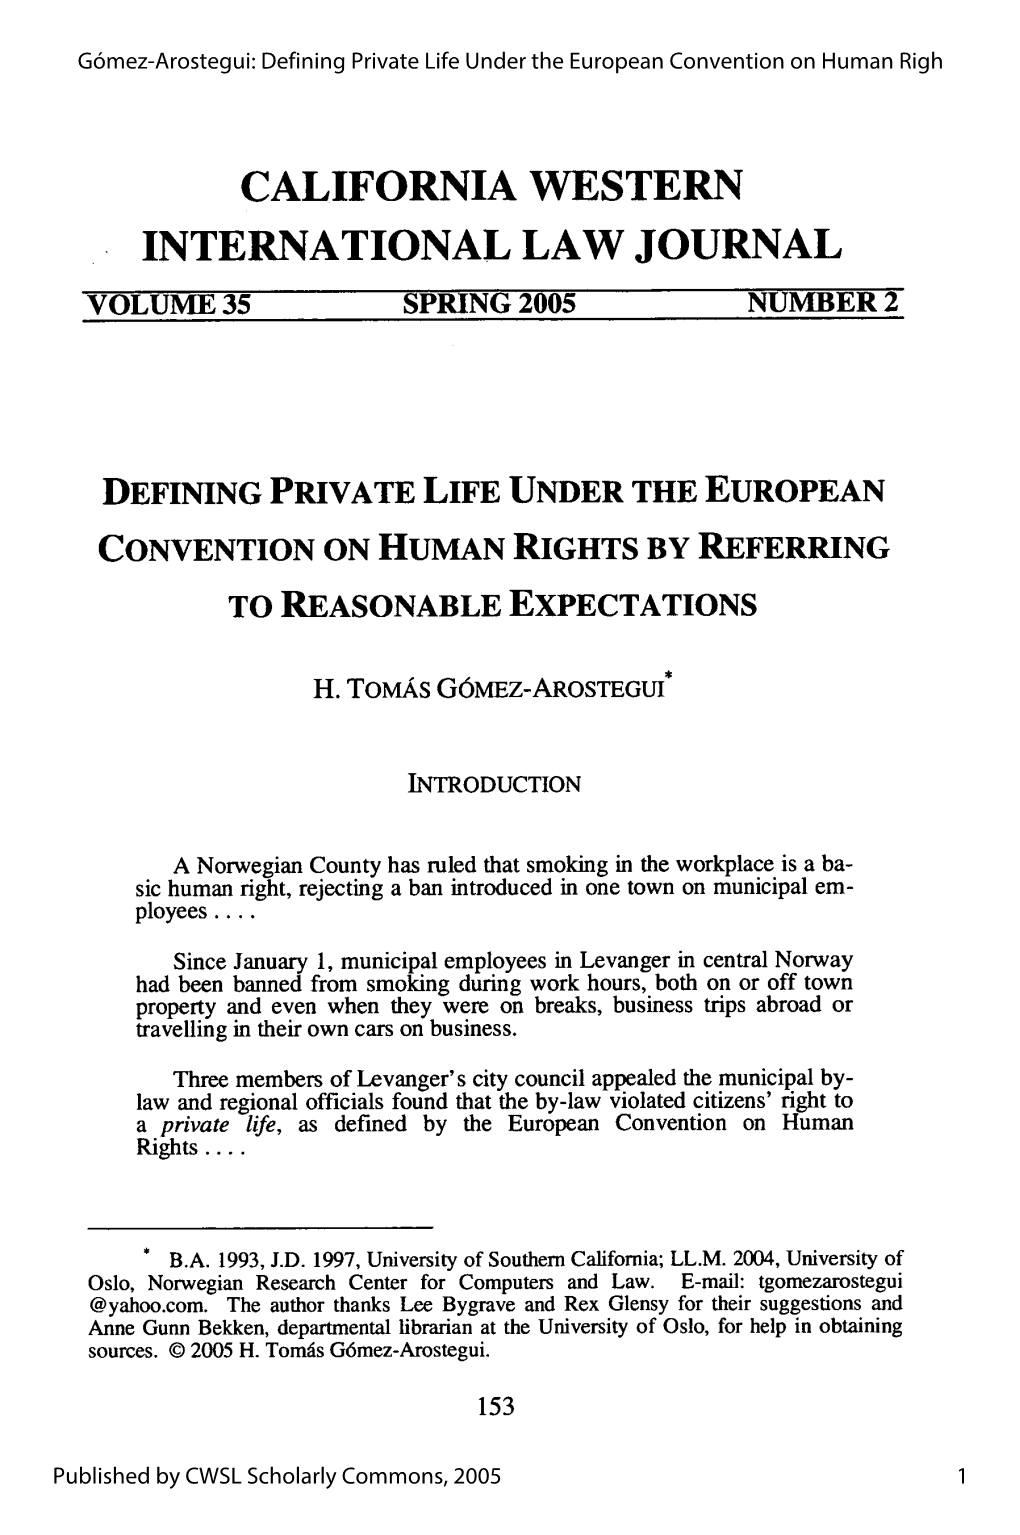 Defining Private Life Under the European Convention on Human Righ